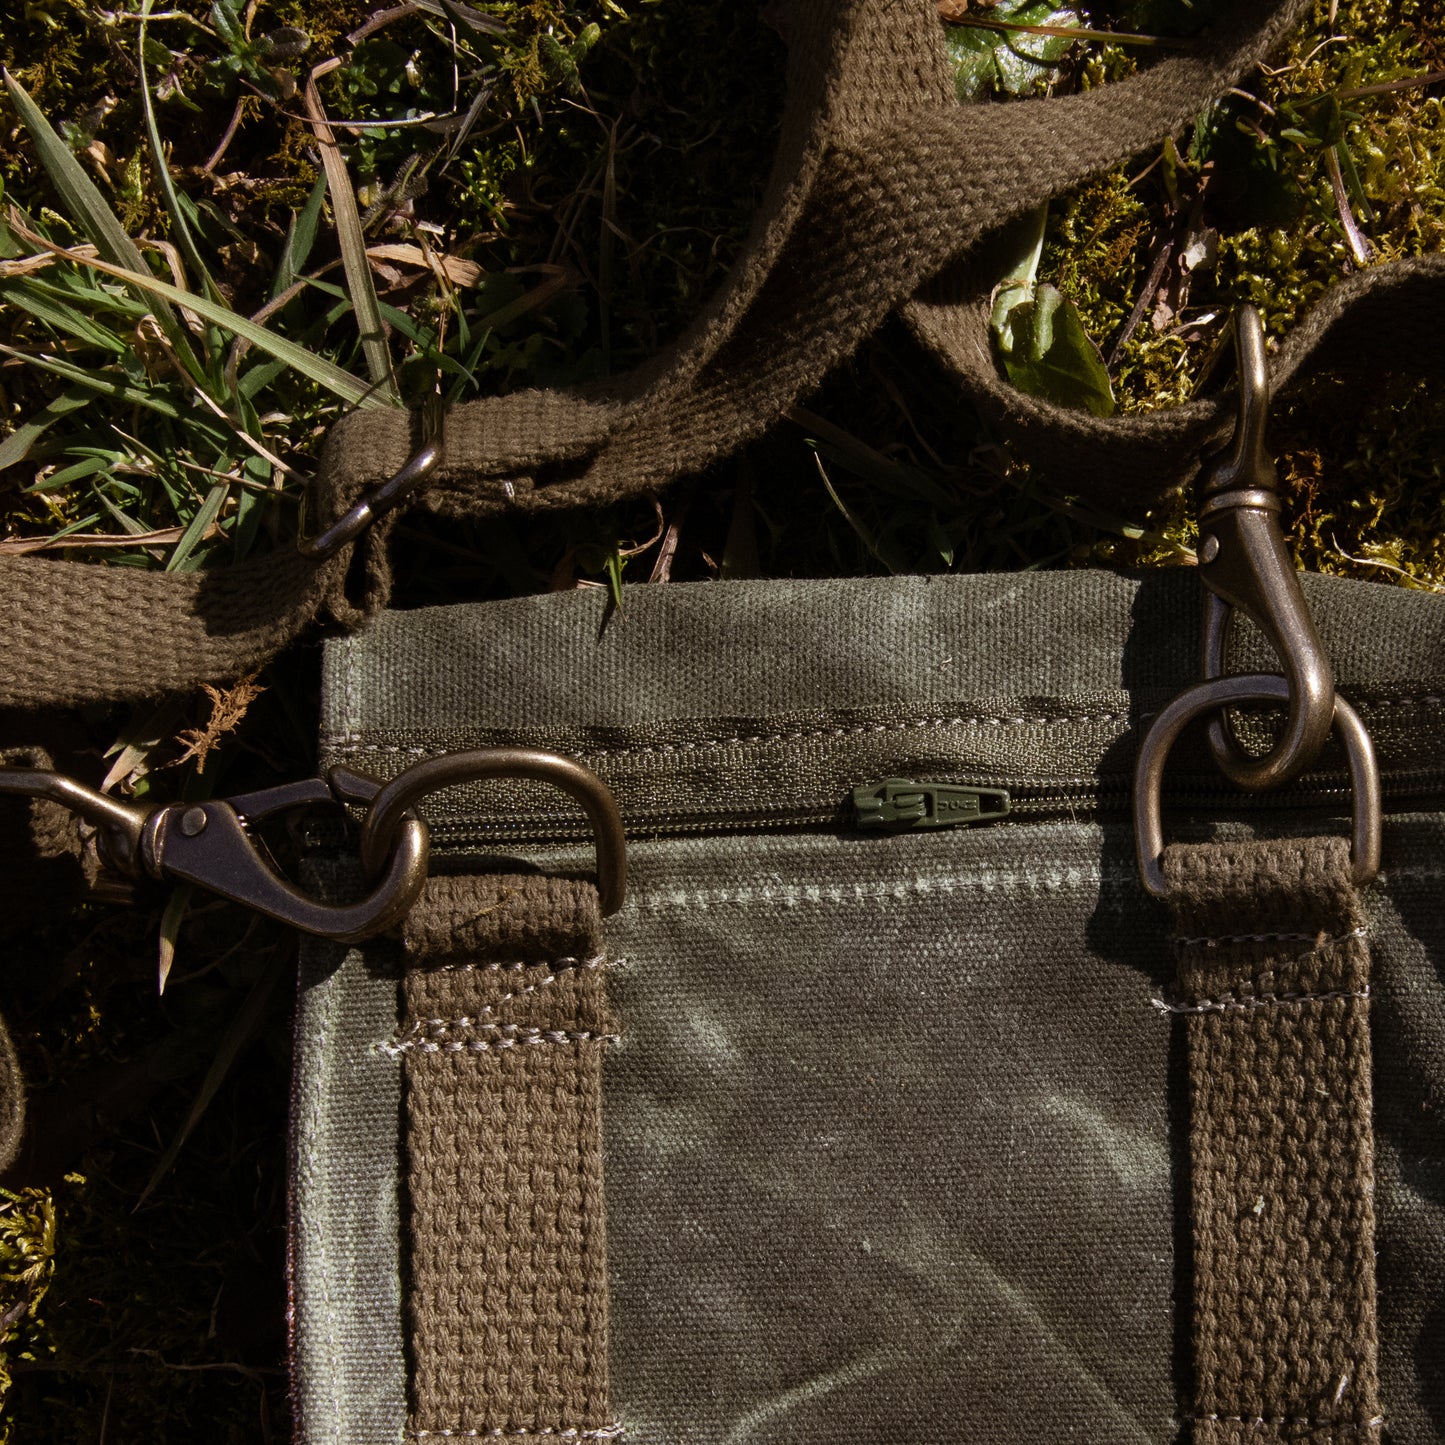 The "LEGION" 3-way satchel in OLIVE